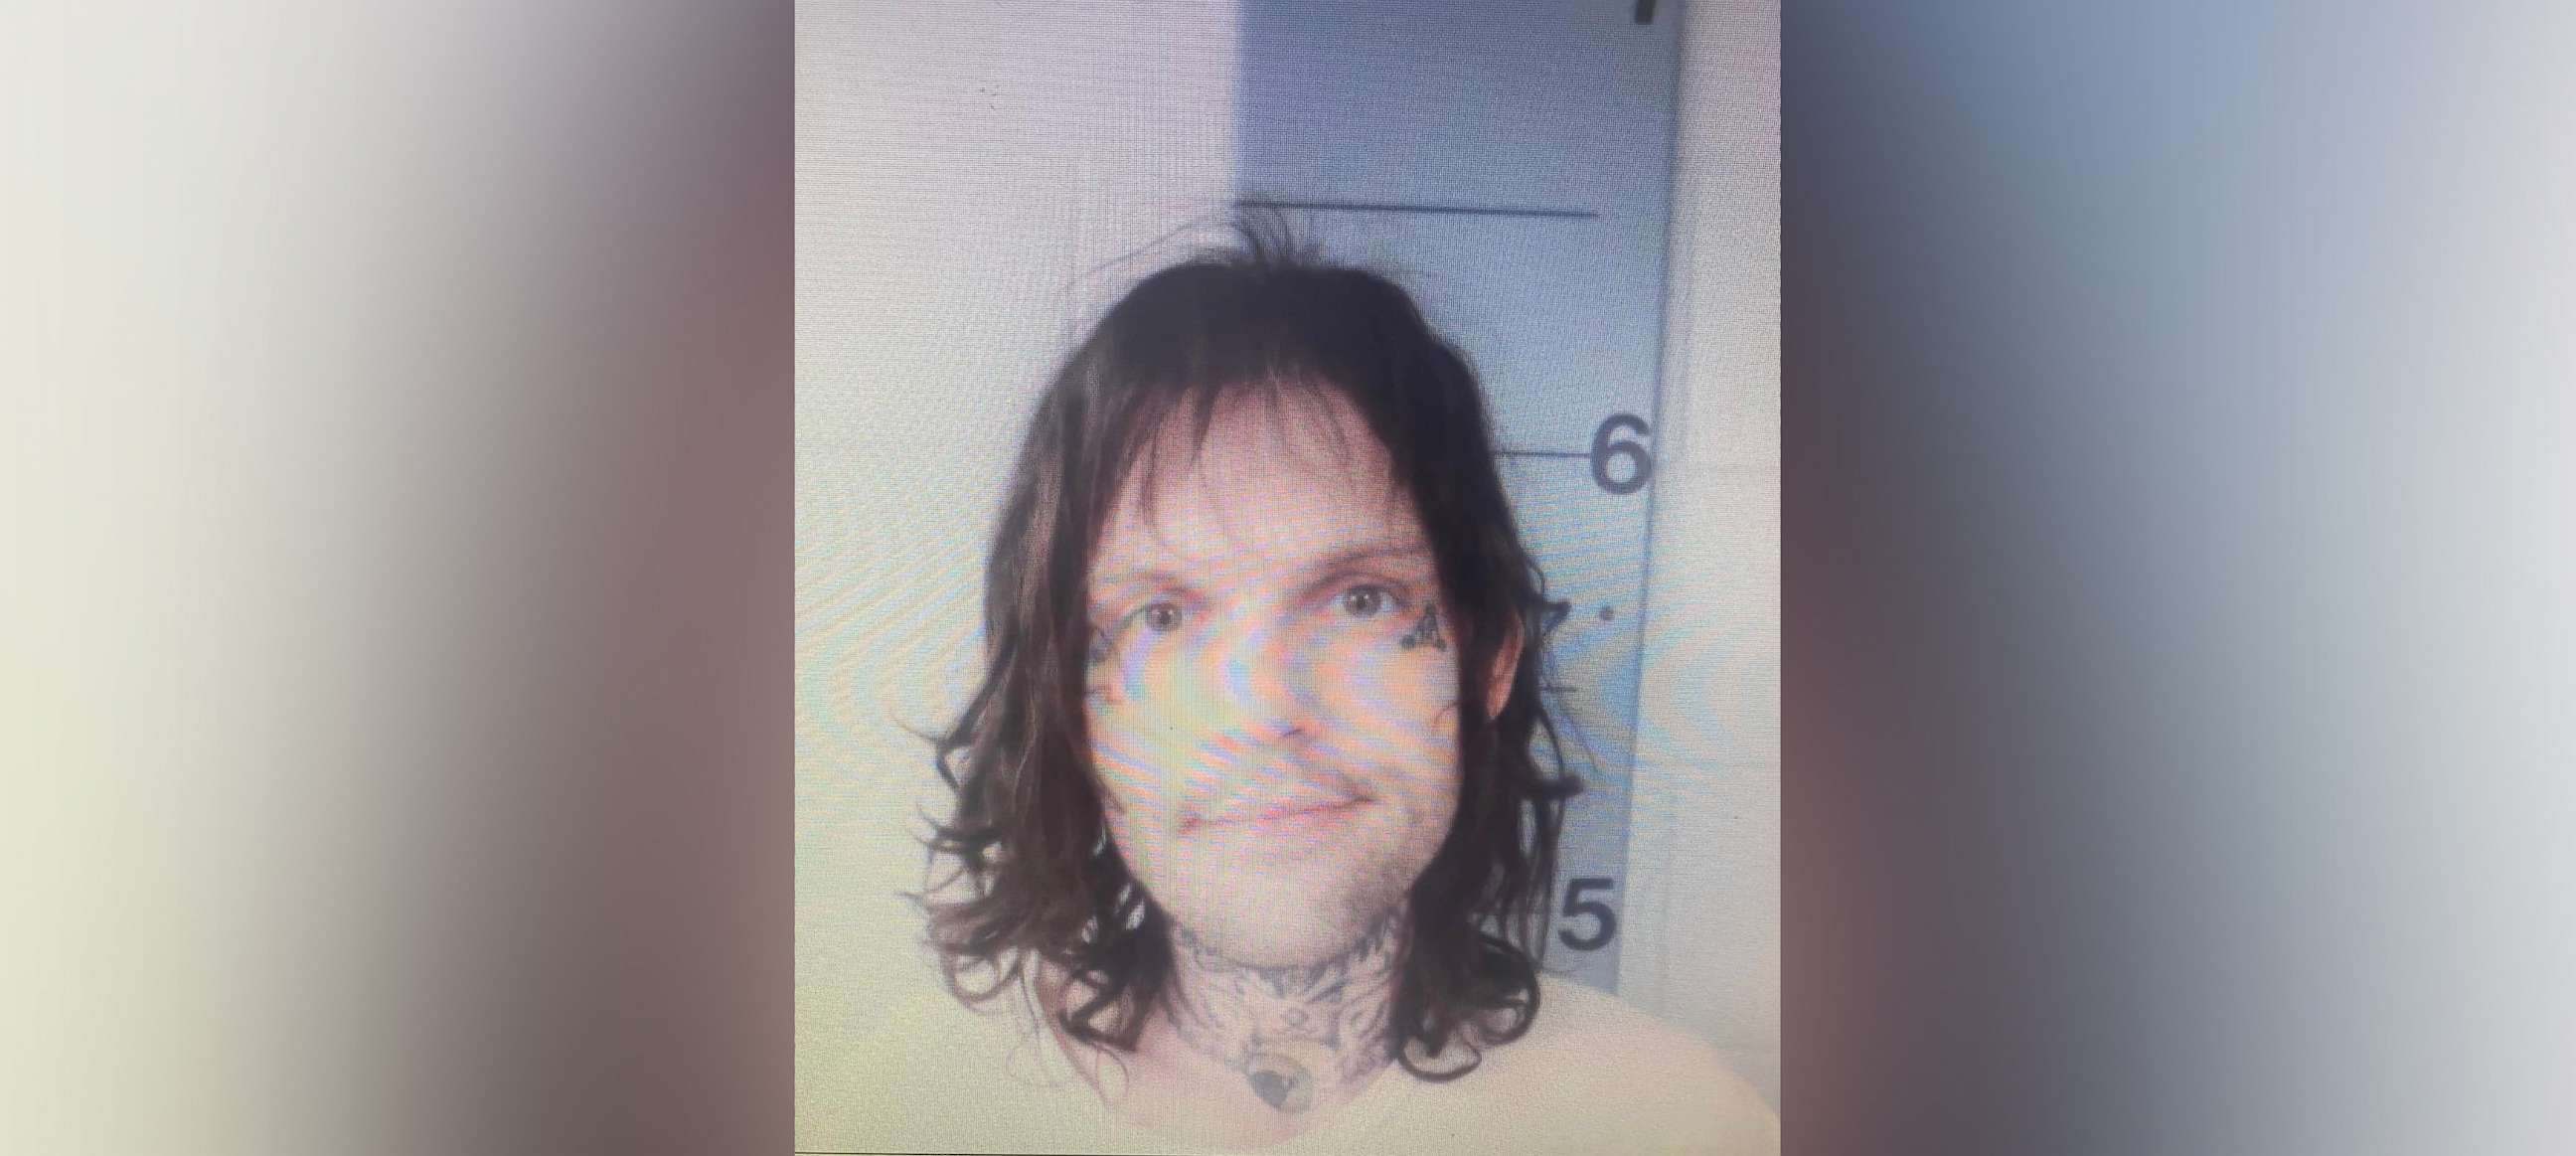 PHOTO: Lance Stephens, an escaped inmate from Barry County Jail in Cassville, Missouri, is  pictured in an image released by law enforcements.